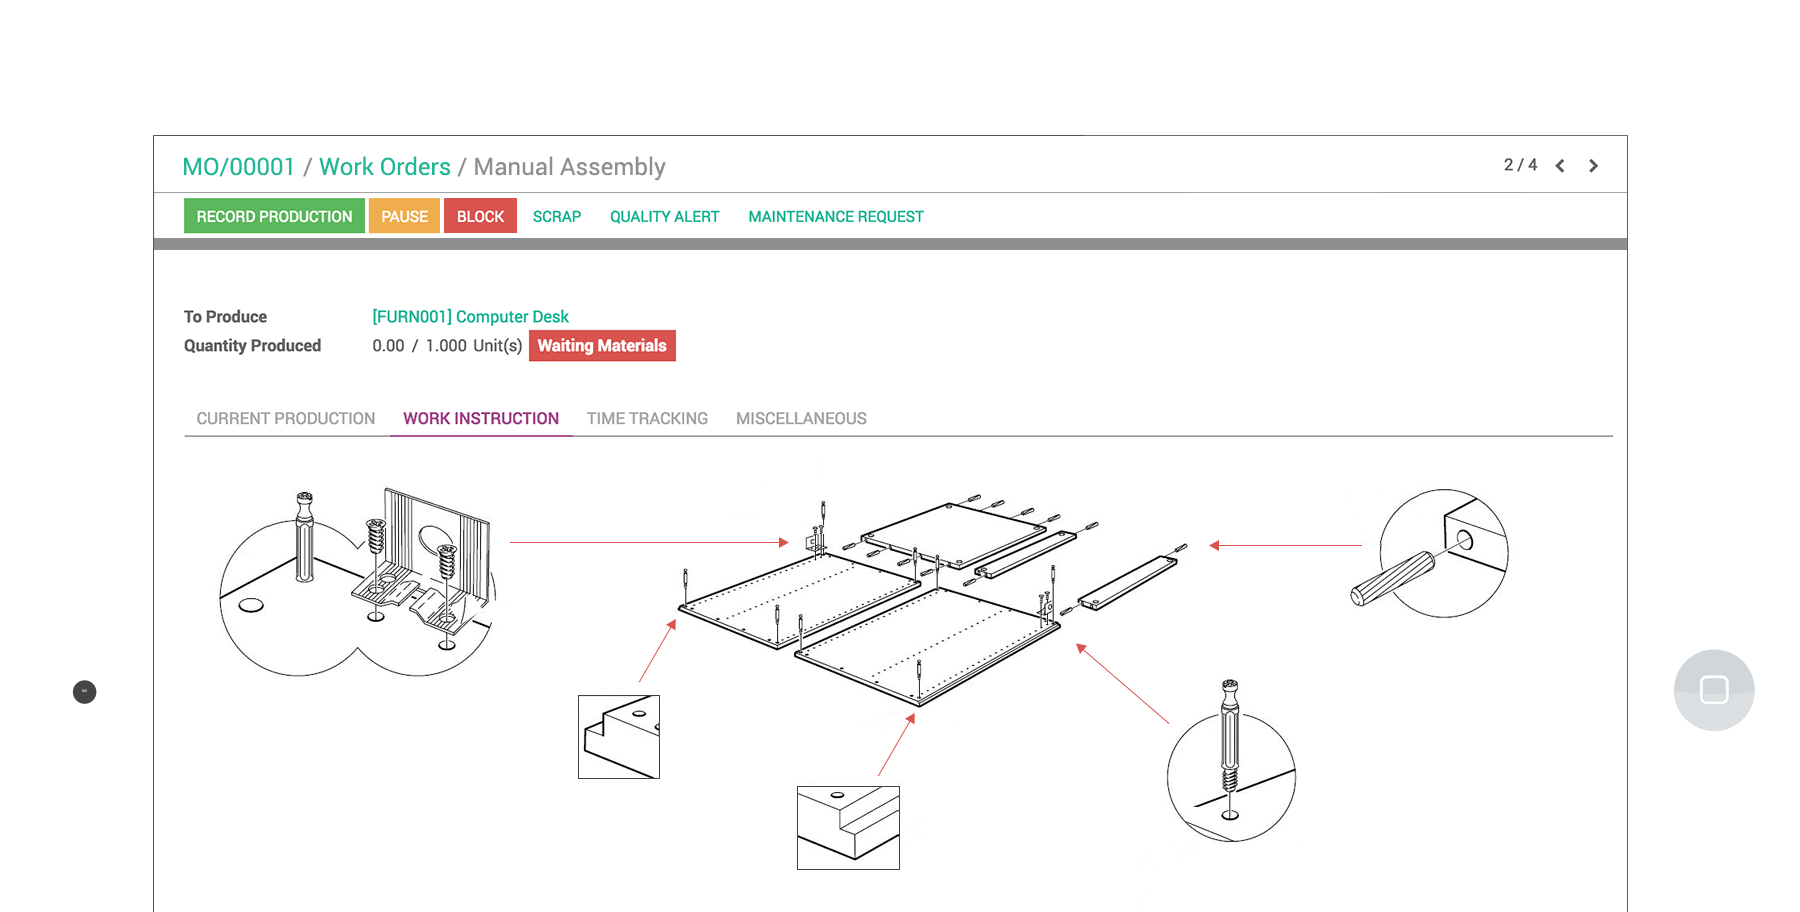 Odoo Manufacturing tablet interface showing a manual assembly for a work order